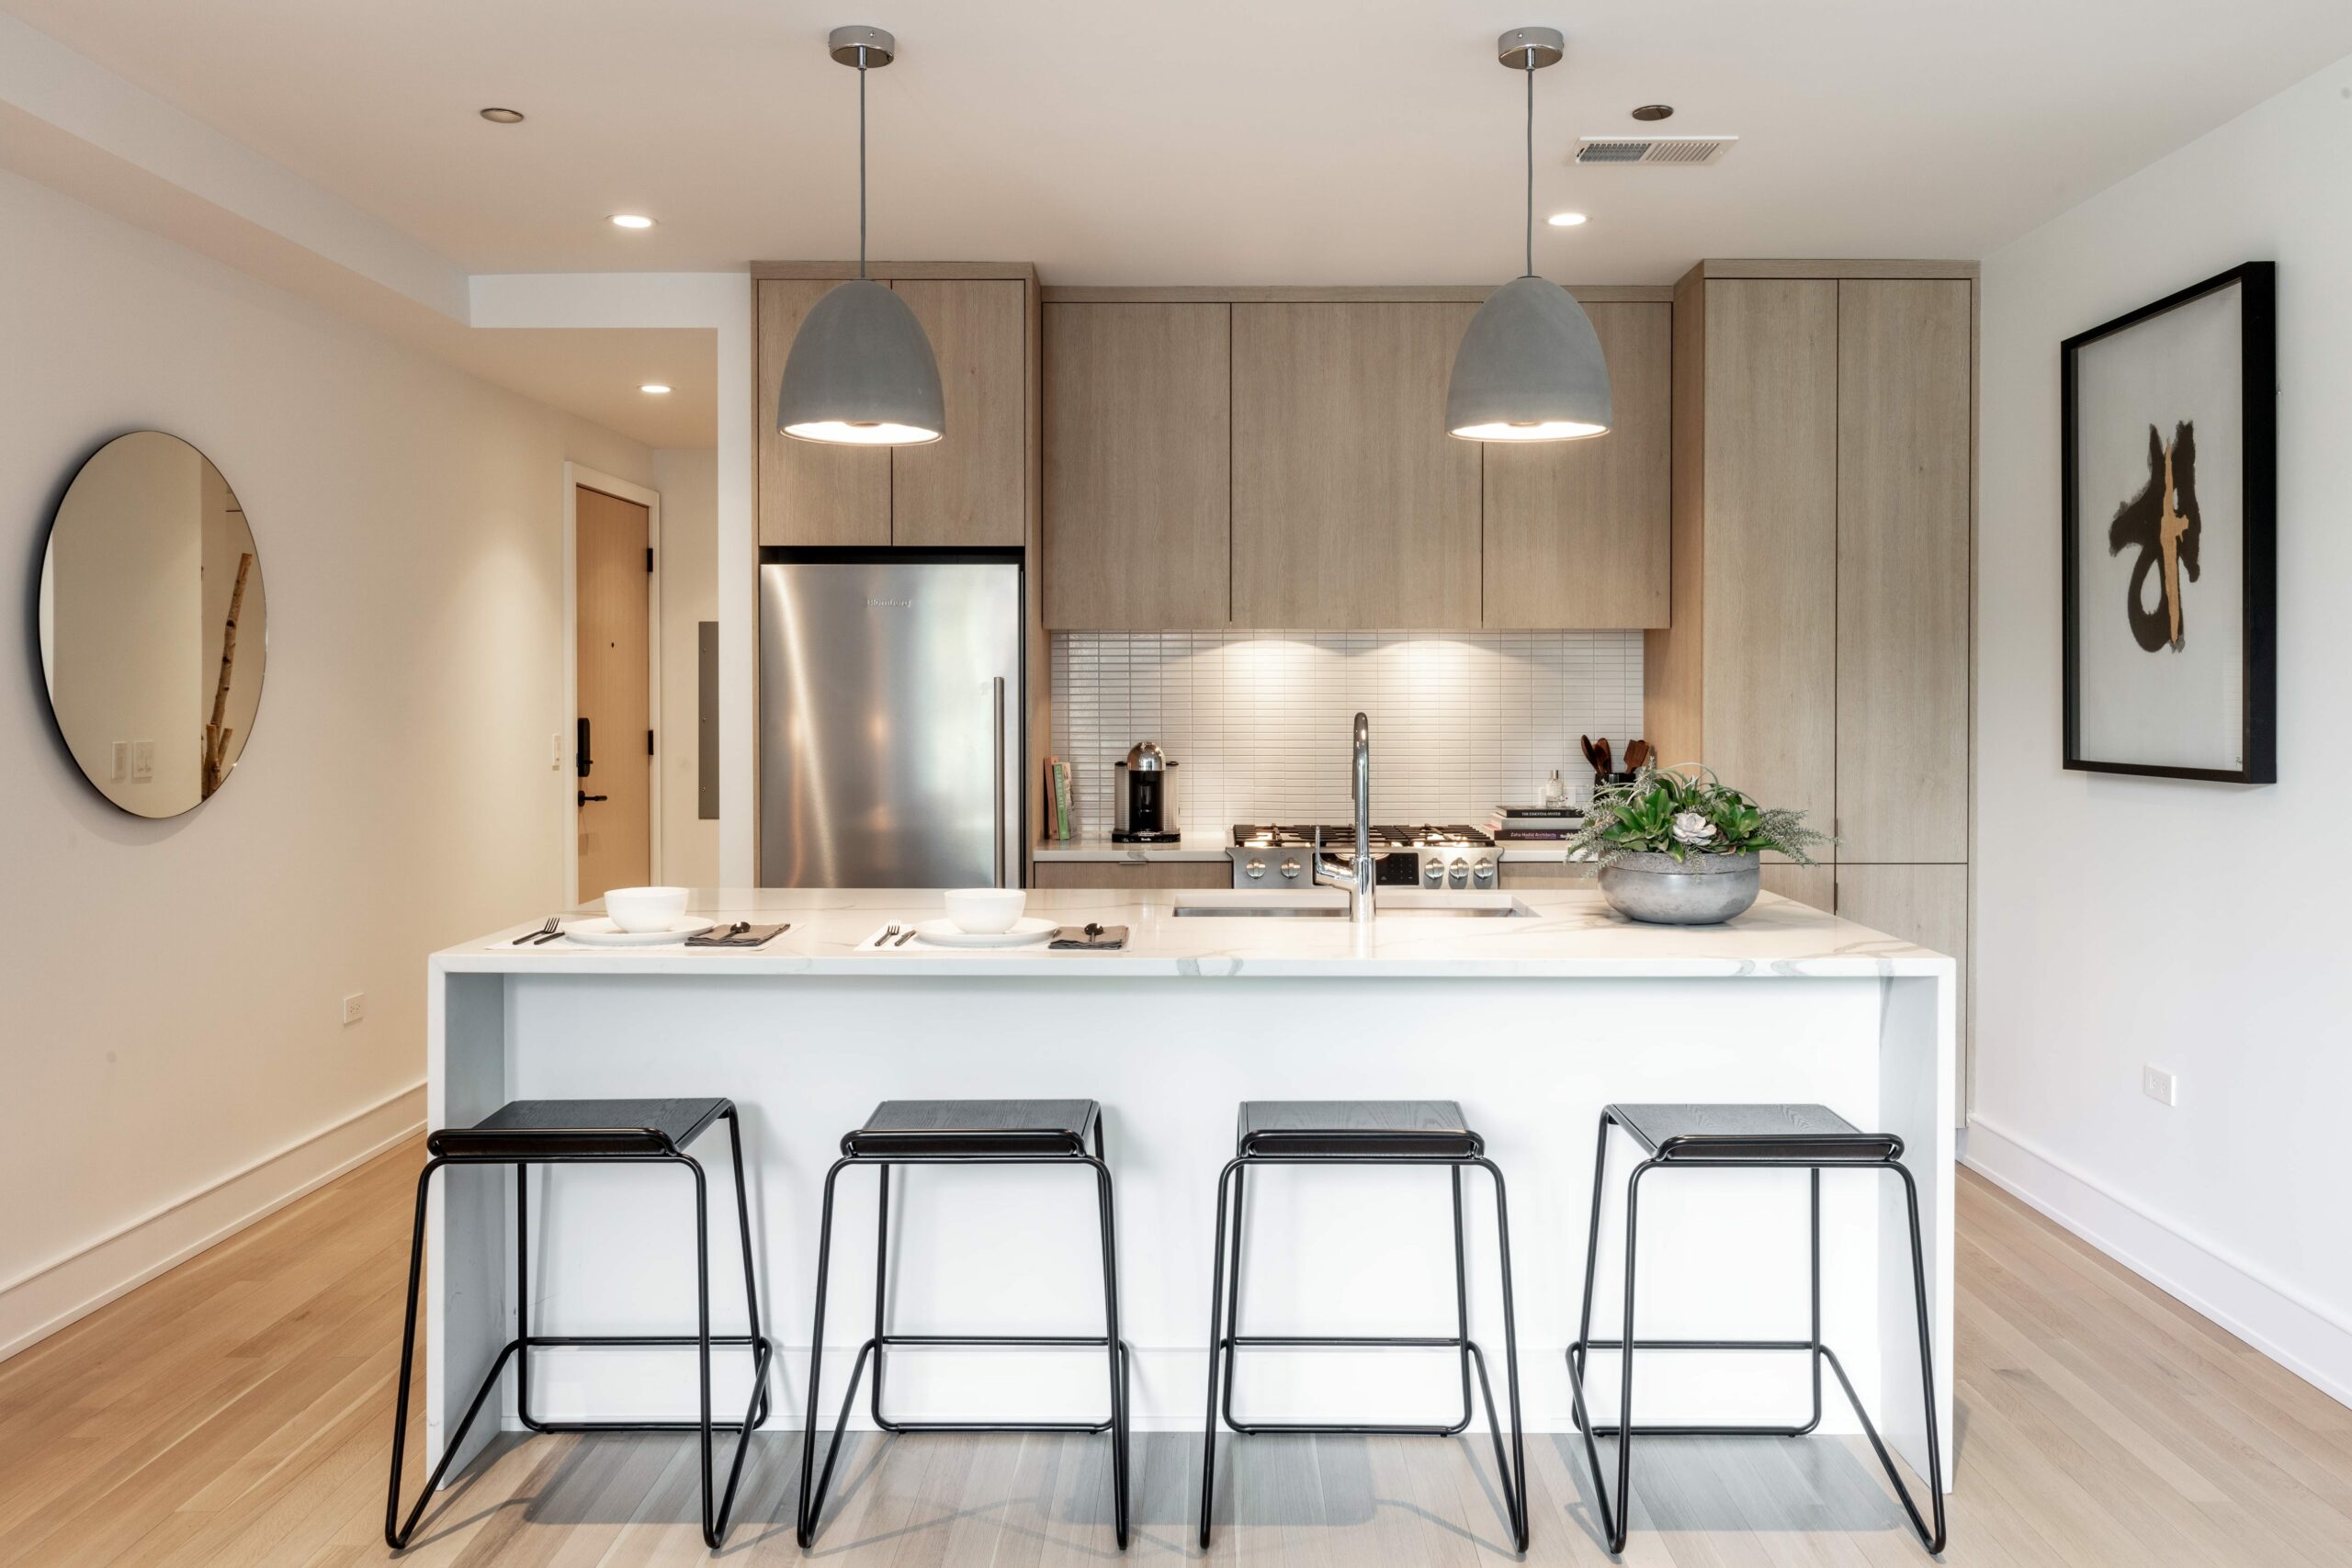 No. 508 Lincoln Park Apartment's beautiful marble countertops and wood-made cabinets.